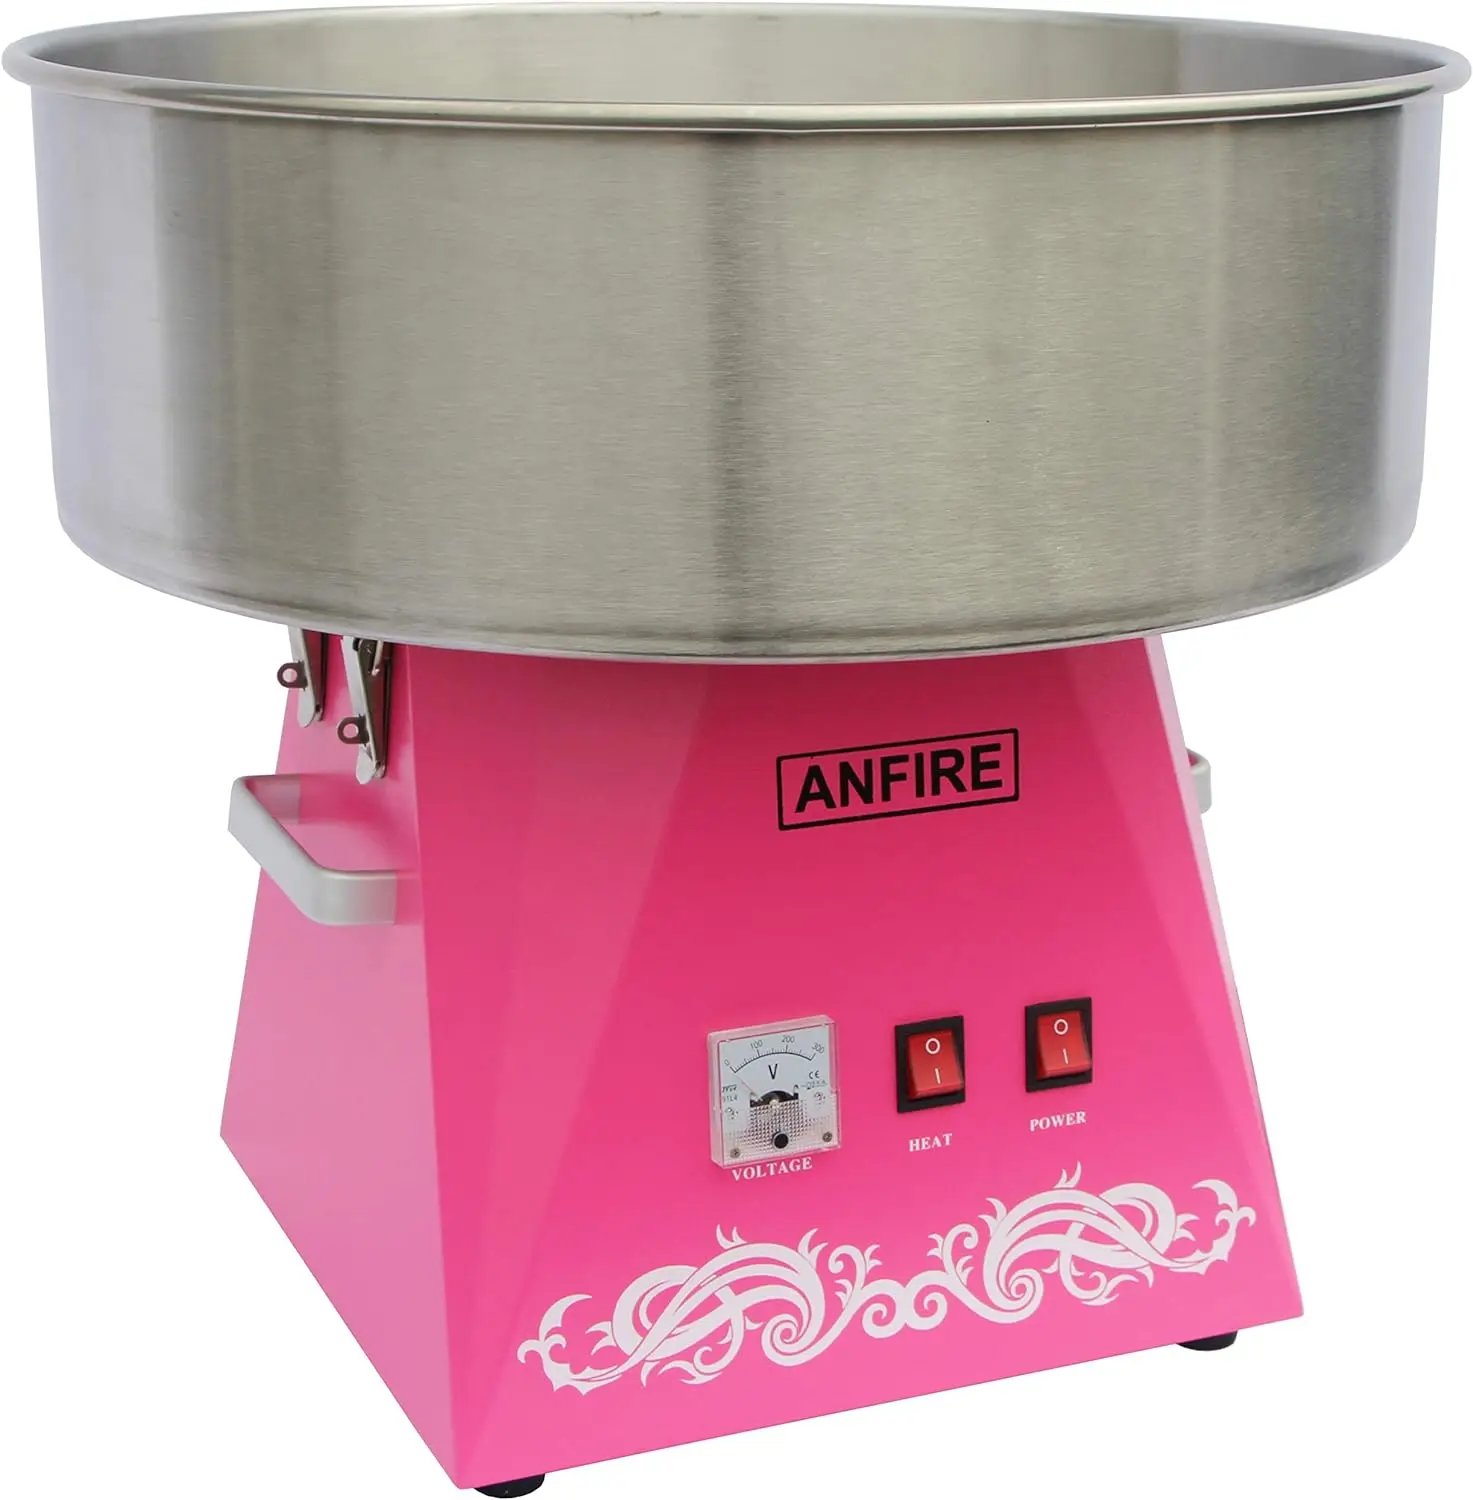 

Cotton Candy Machine Pink Candy Floss Maker for Kits or Party - Includes 10 Cones & Scoop